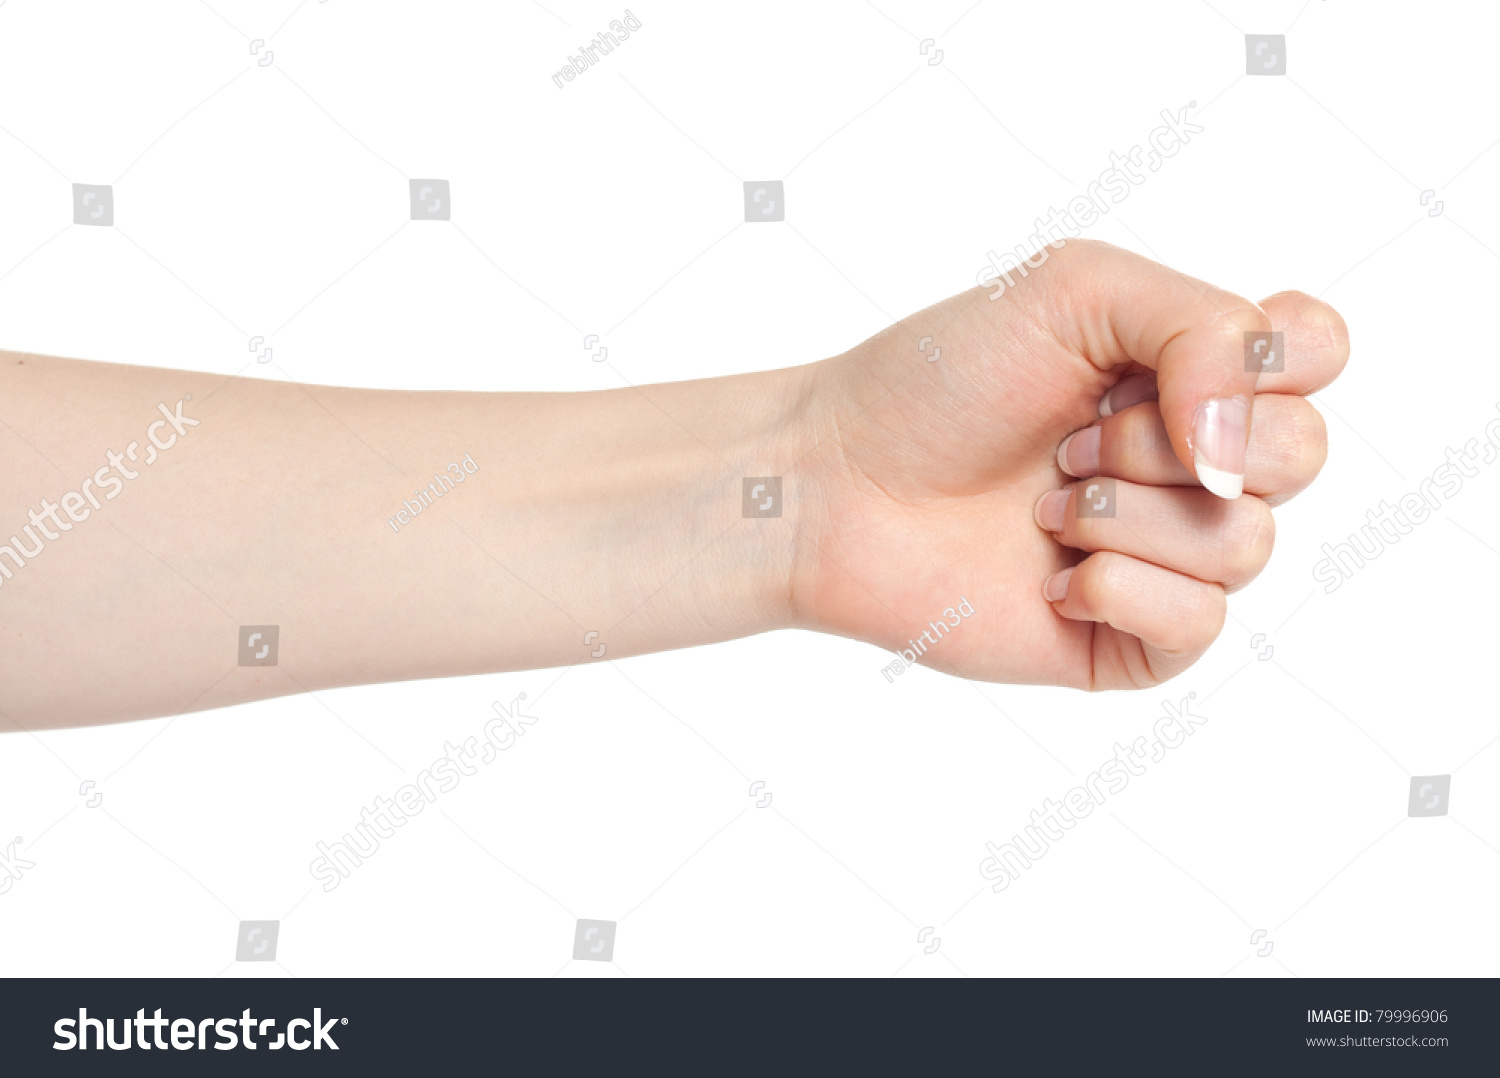 Woman hand with fingers folded into a fist #79996906